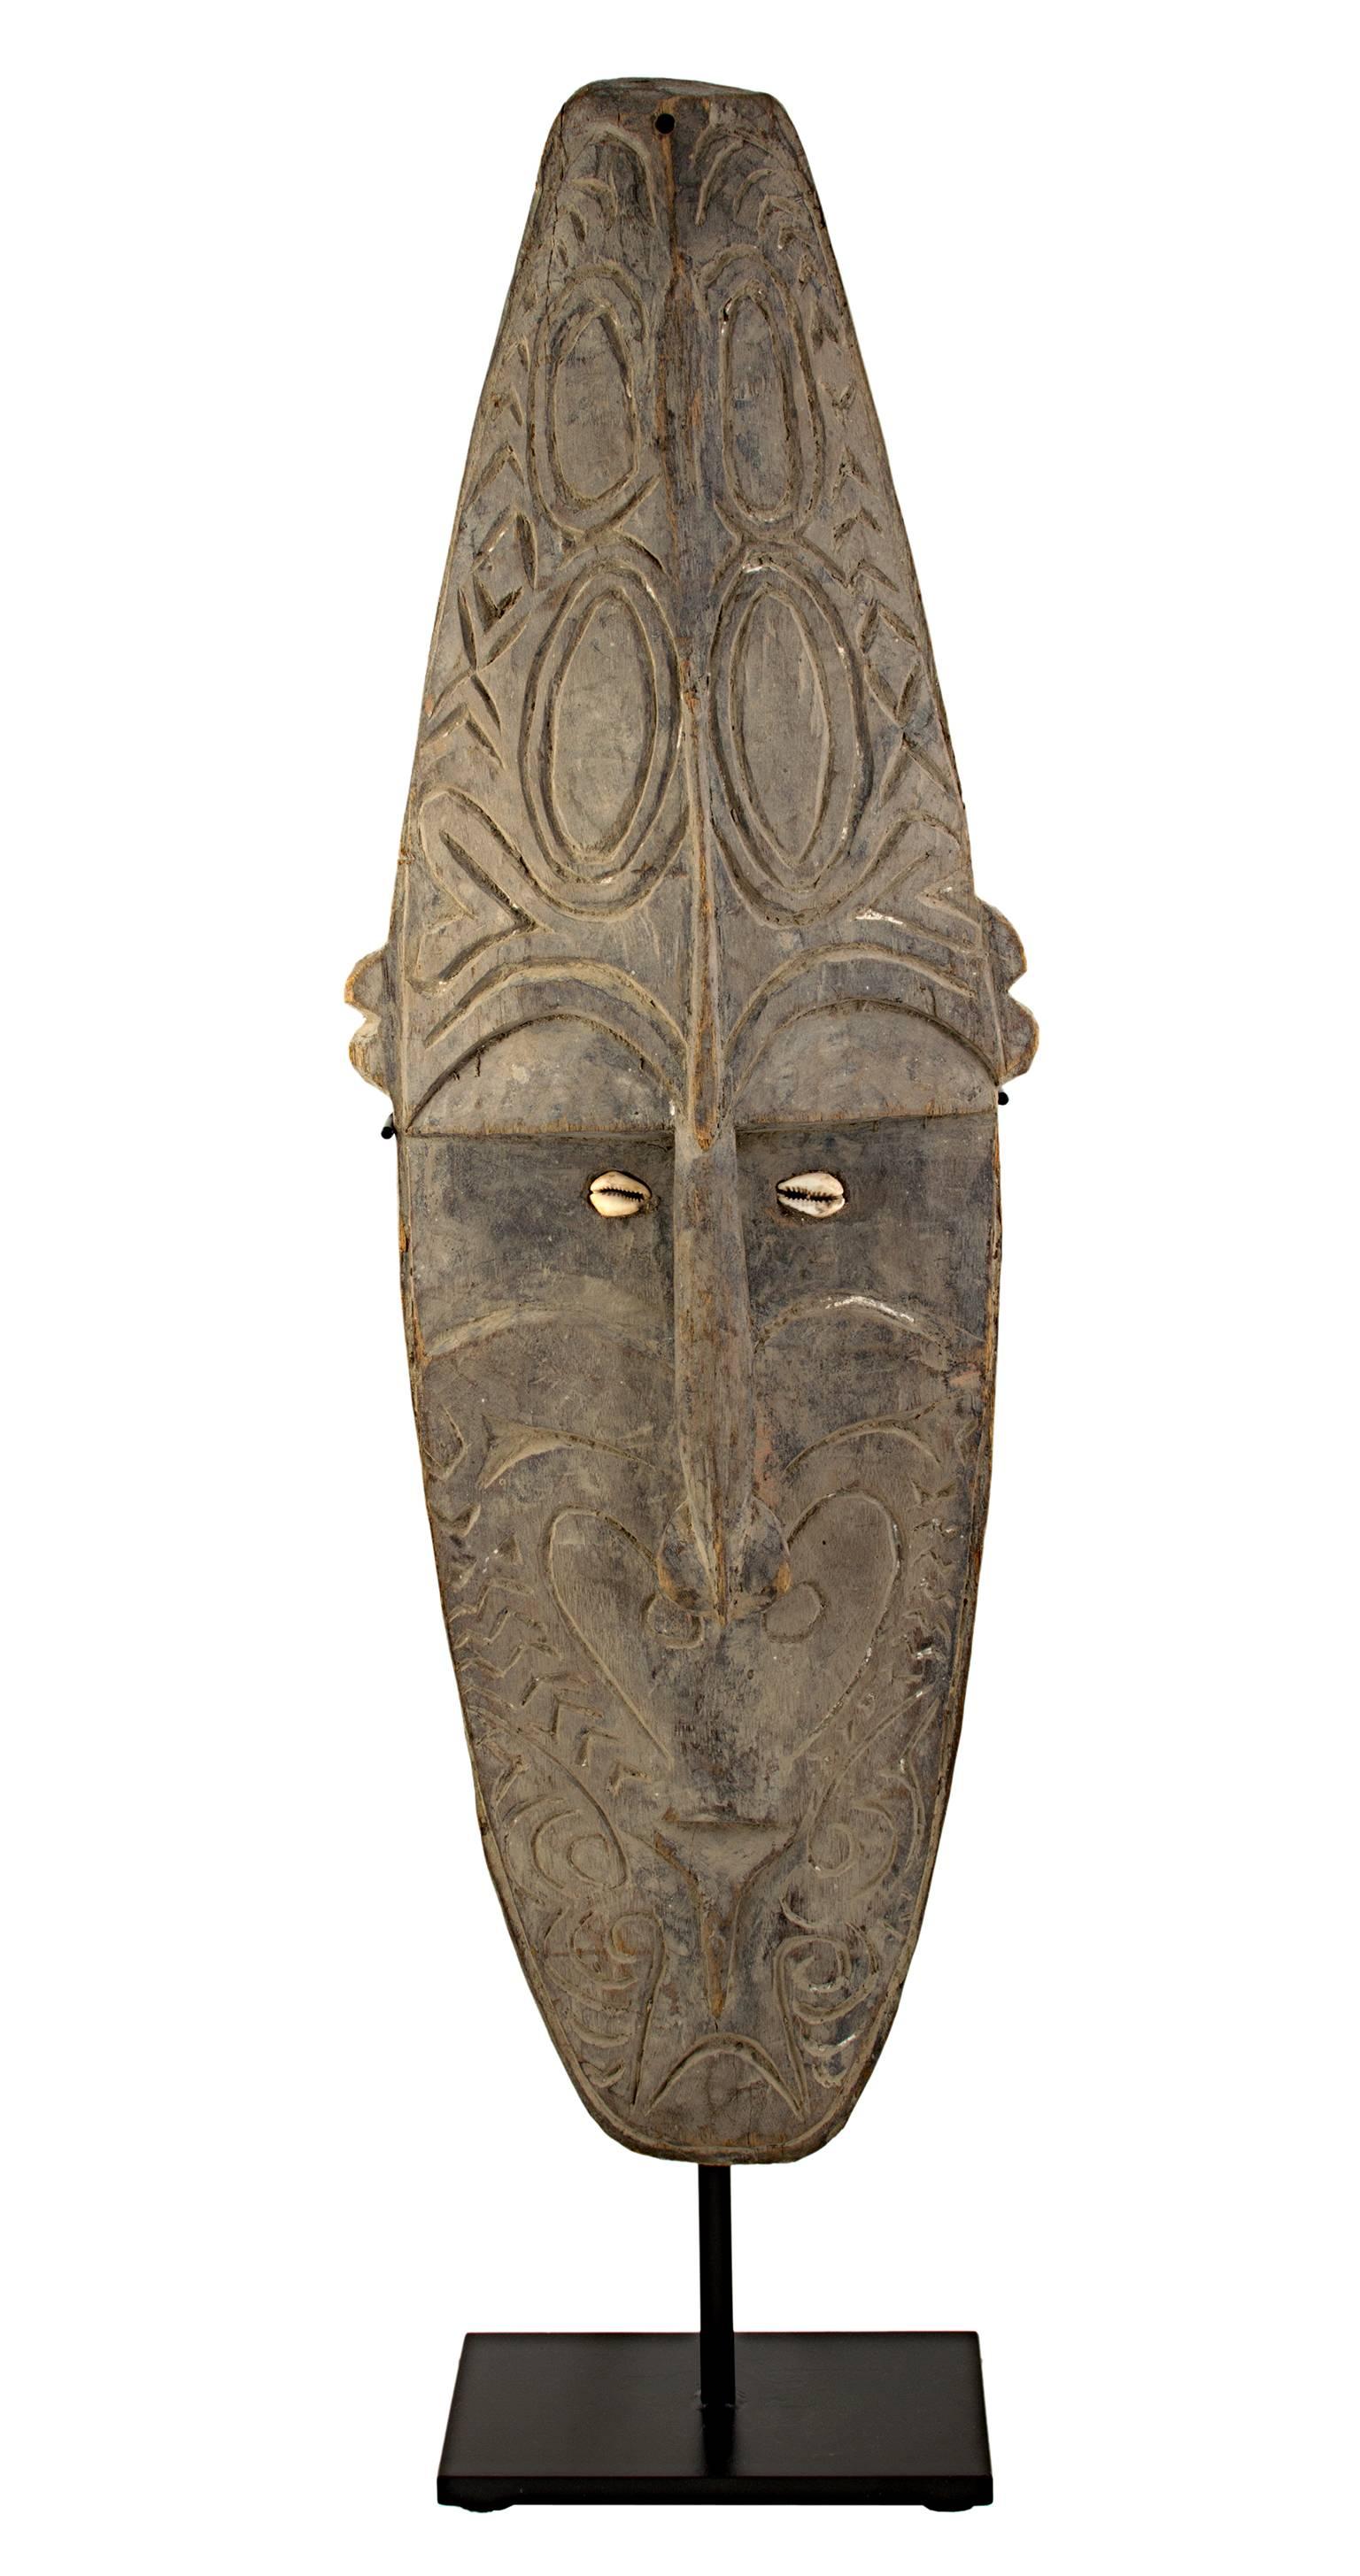 Unknown Figurative Sculpture - "Face Mask, " Wood and Cowry Shells created in New Guinea circa 1940